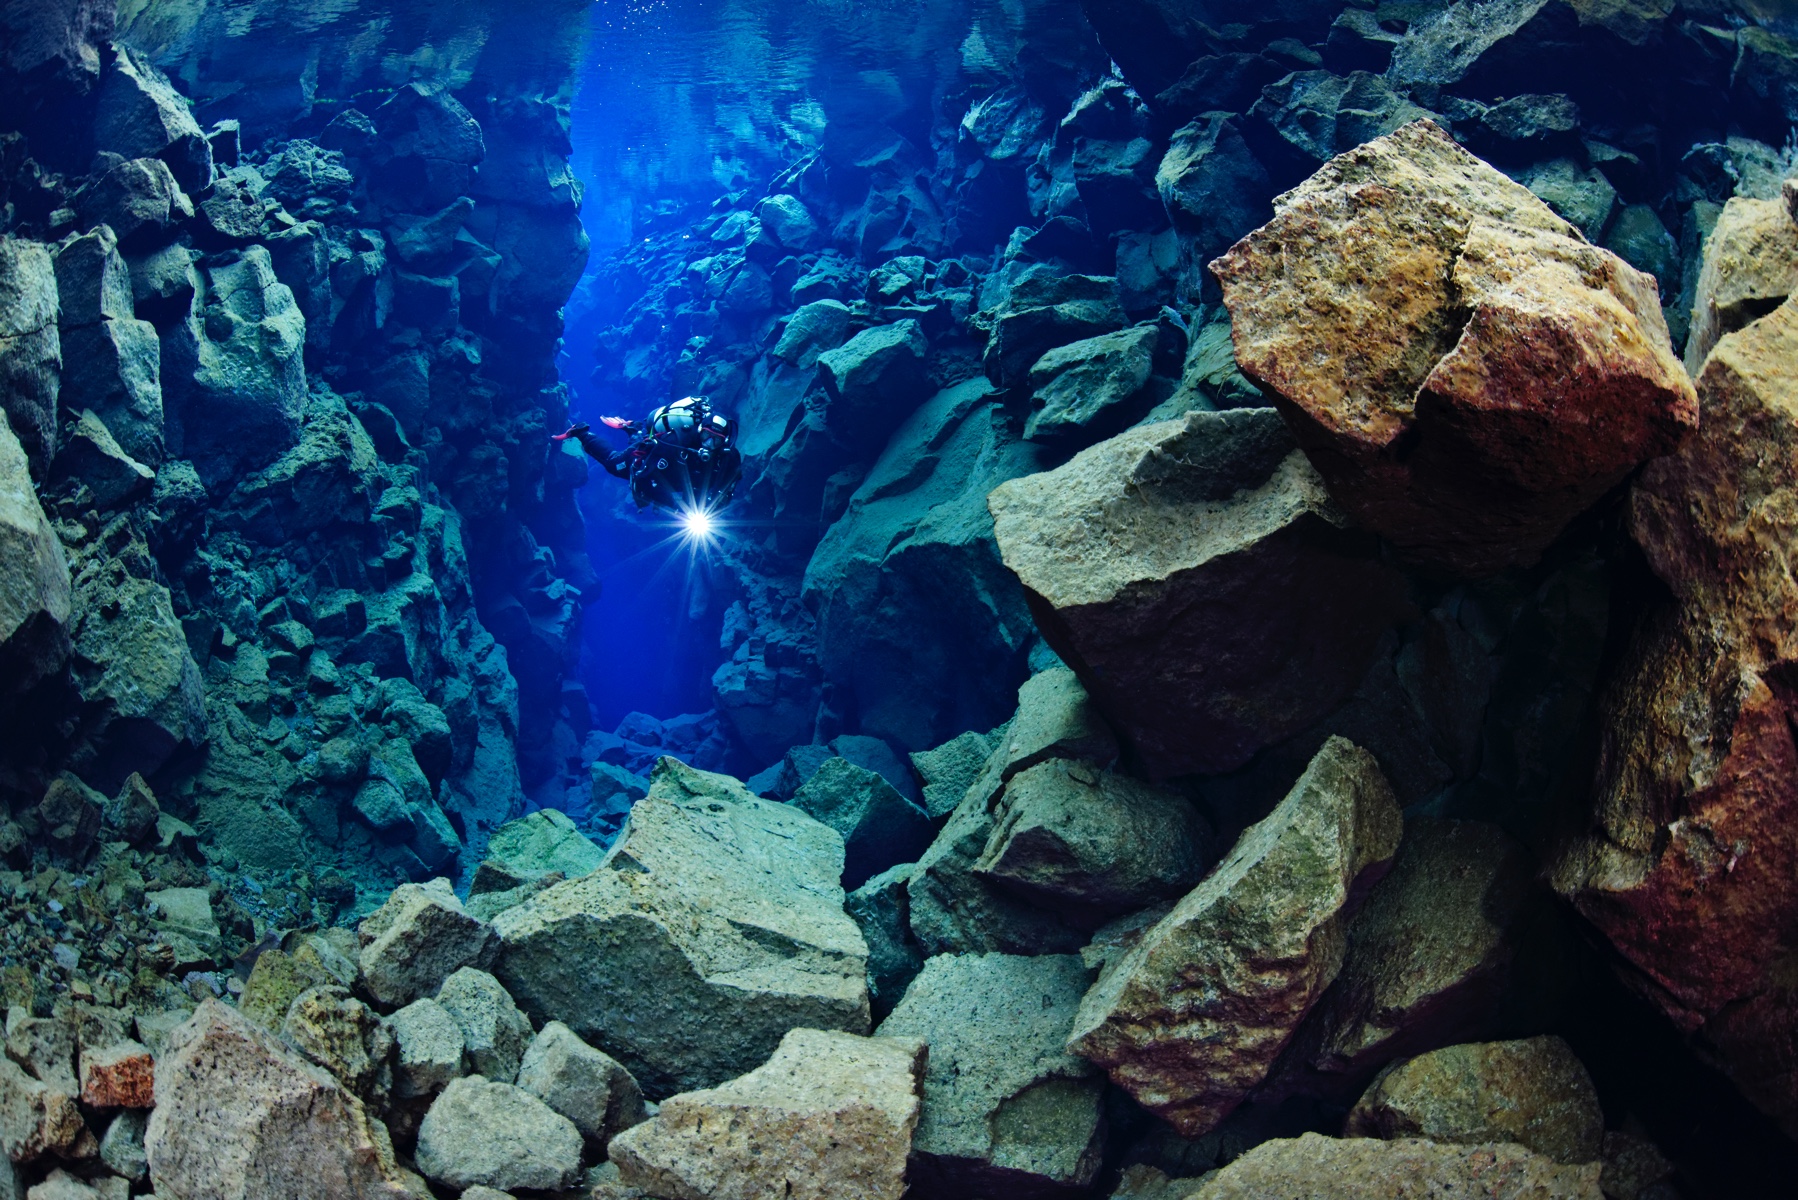 Diver enjoying his dive in the clearest water in the world at Silfra fissure, Iceland